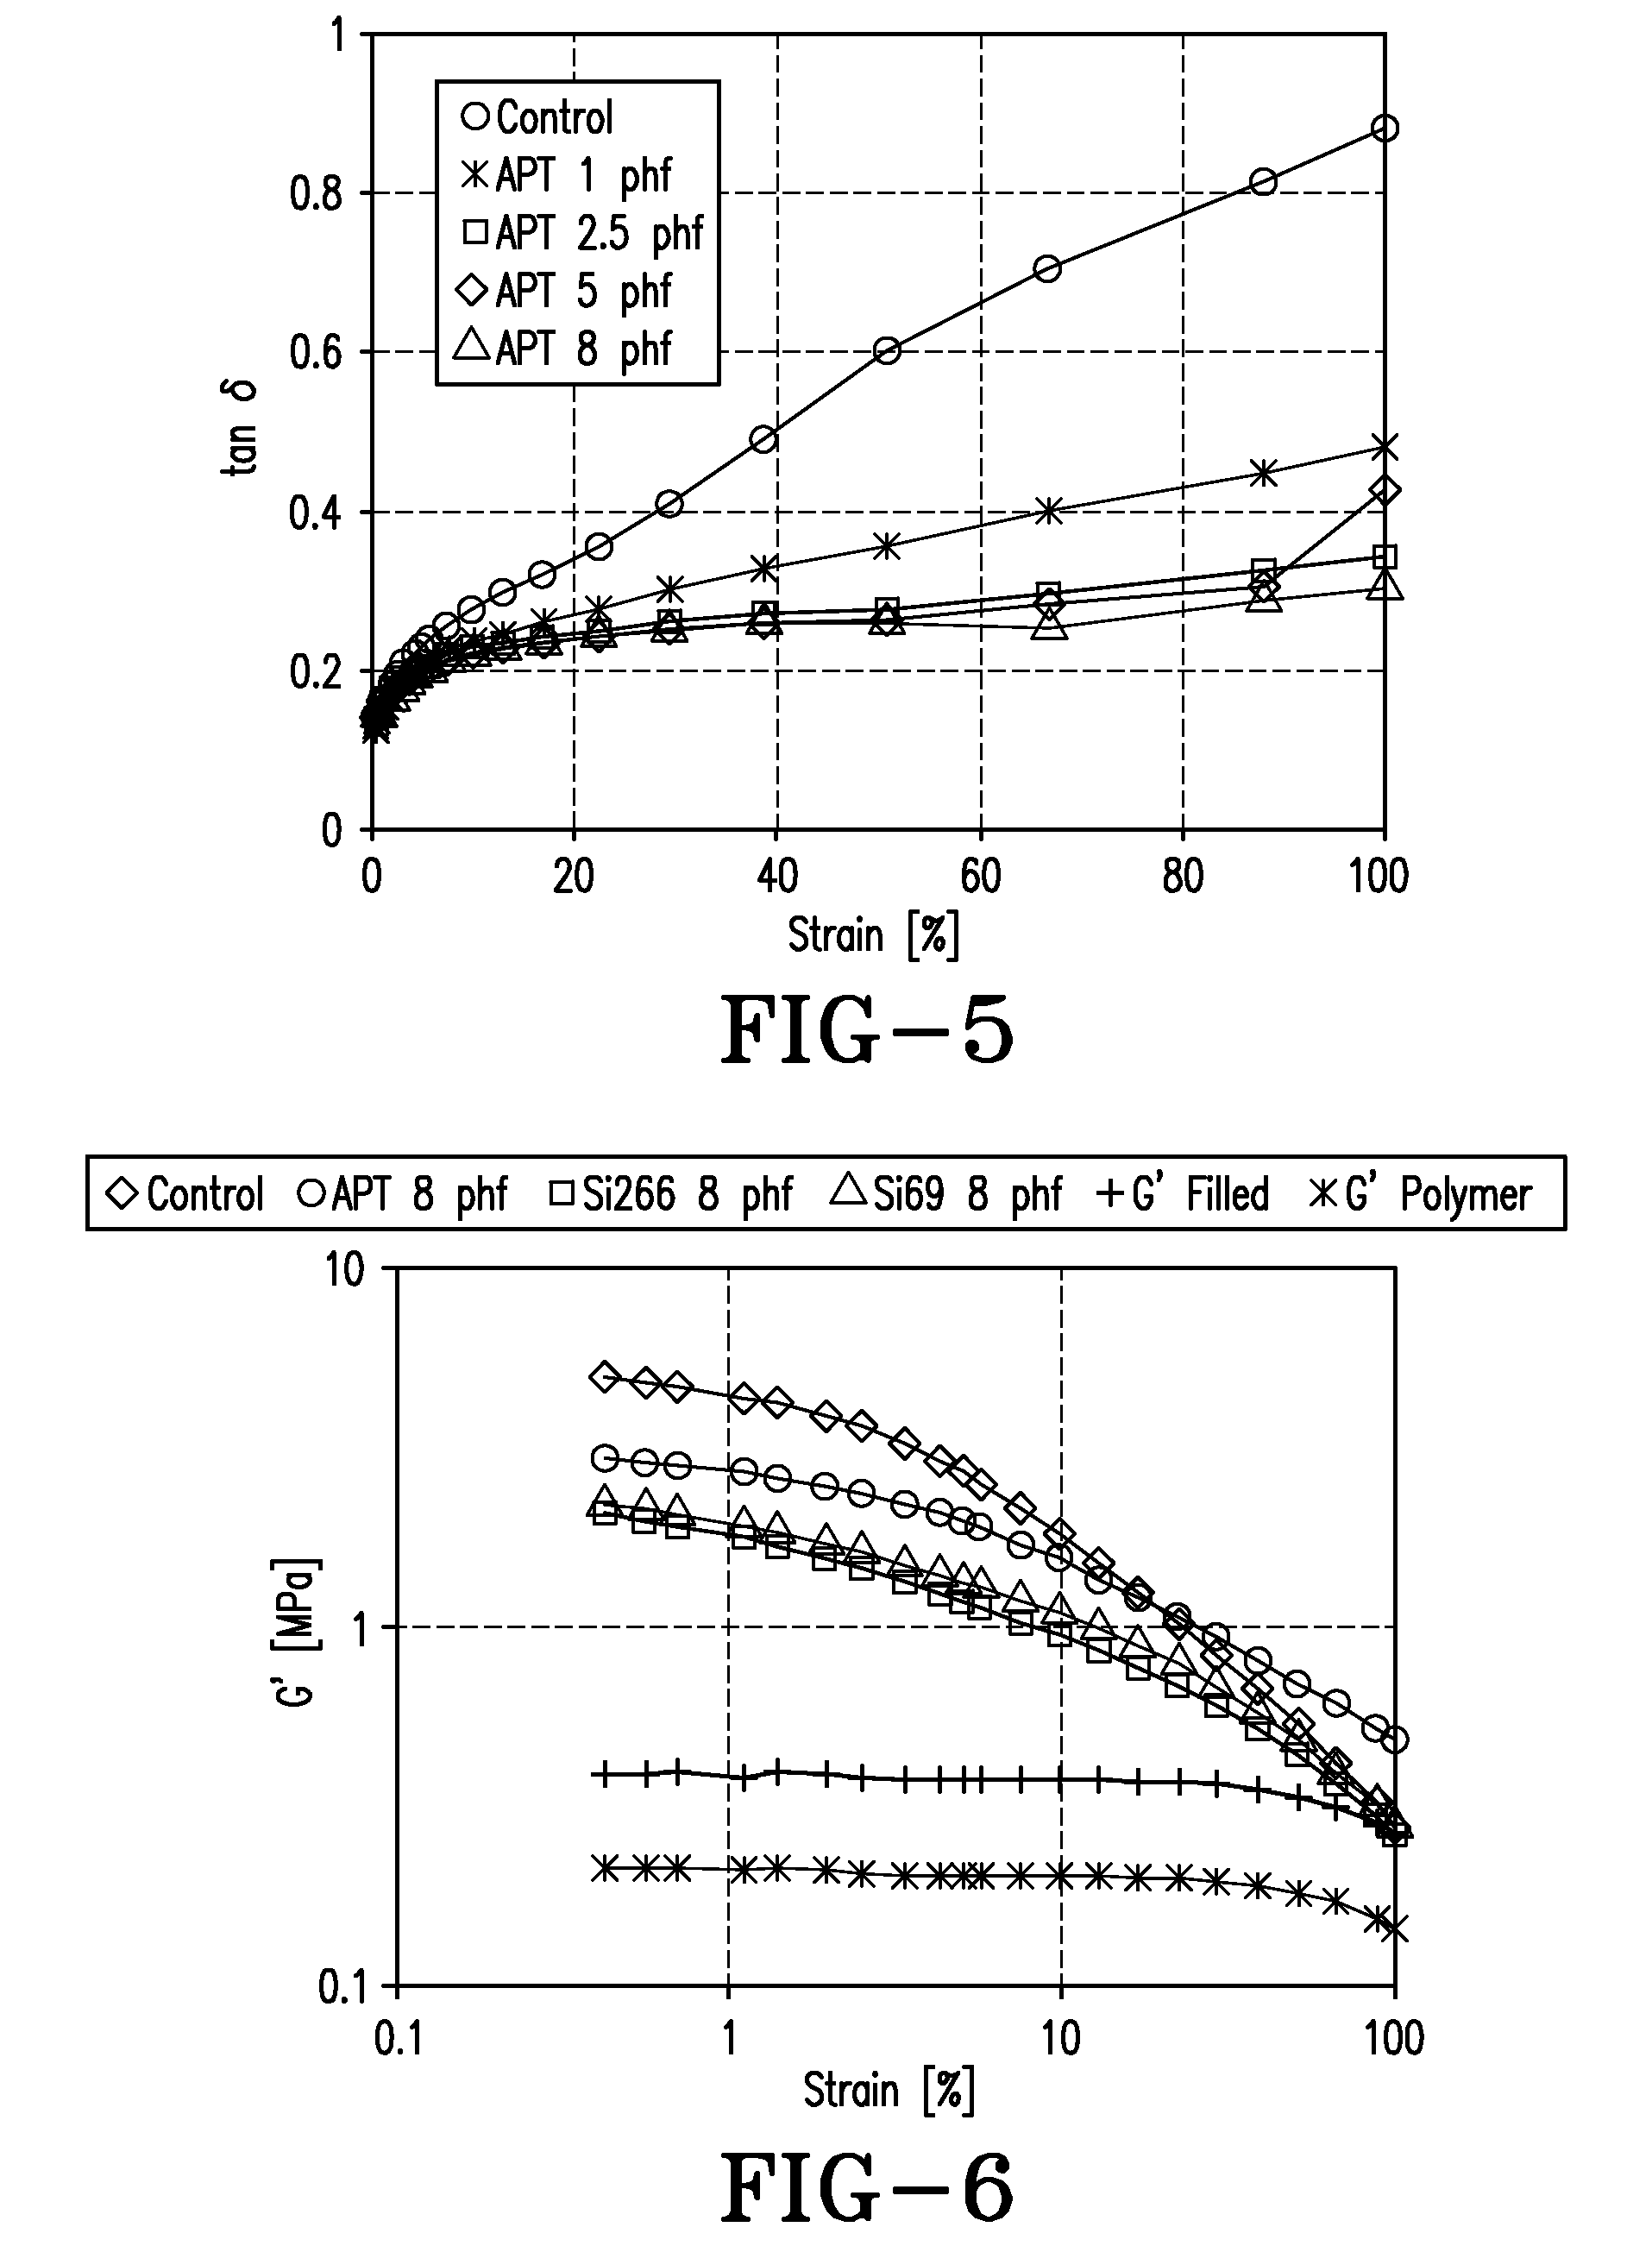 Preparation and use of functionalized elastomers in rubber compositions containing silica filler and tire components thereof